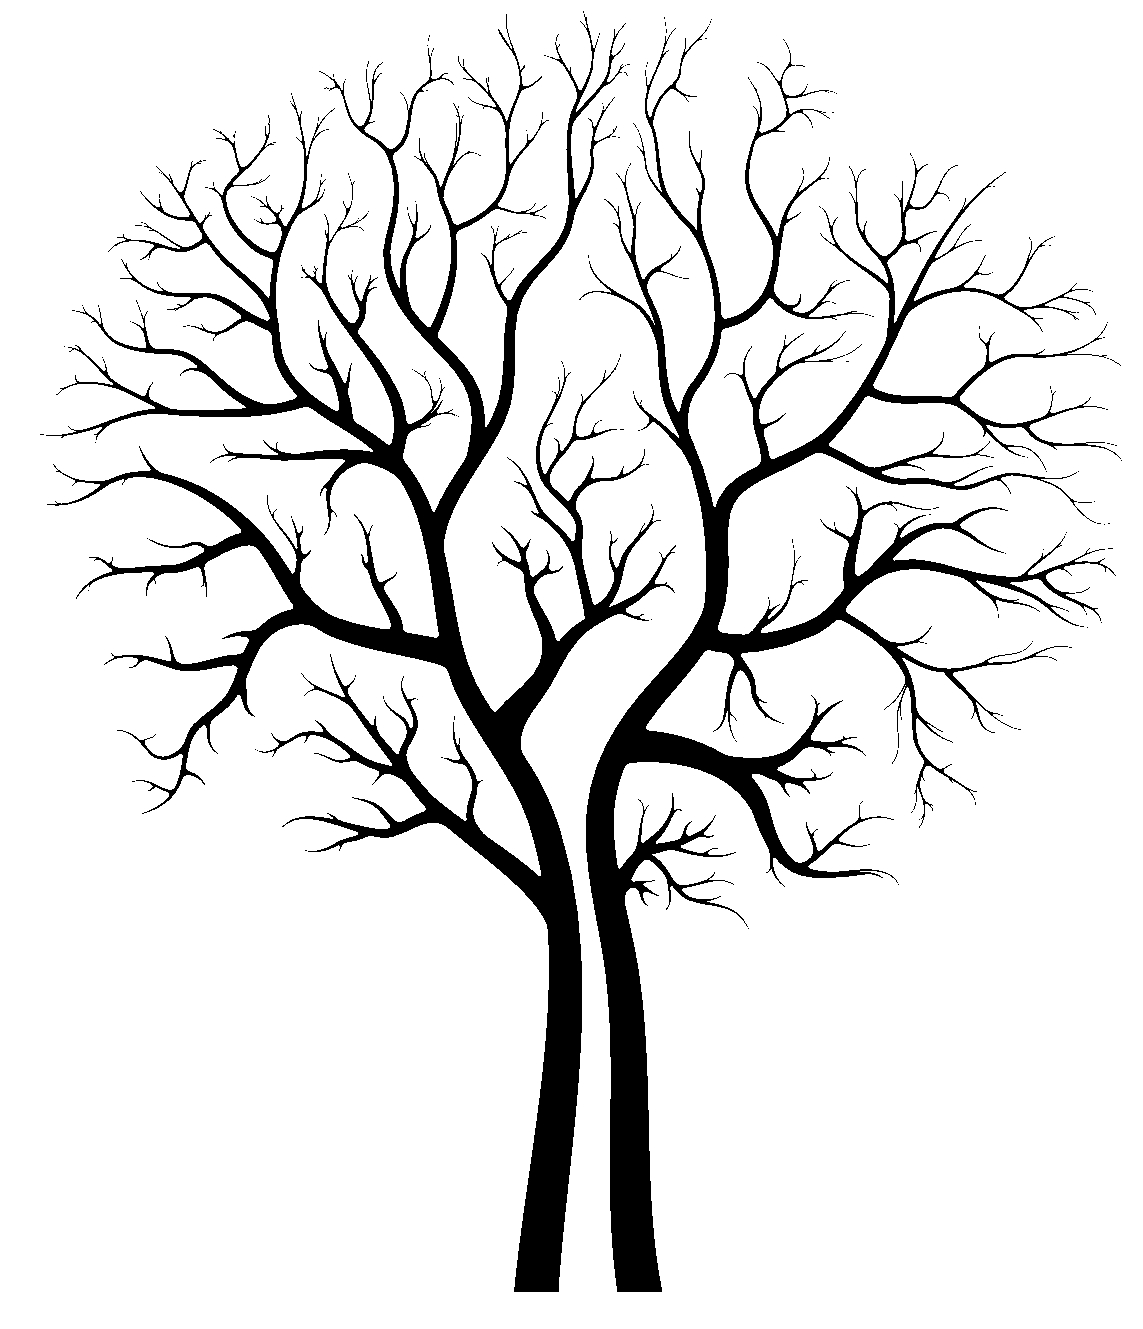 Tree Pictures Art - ClipArt Best